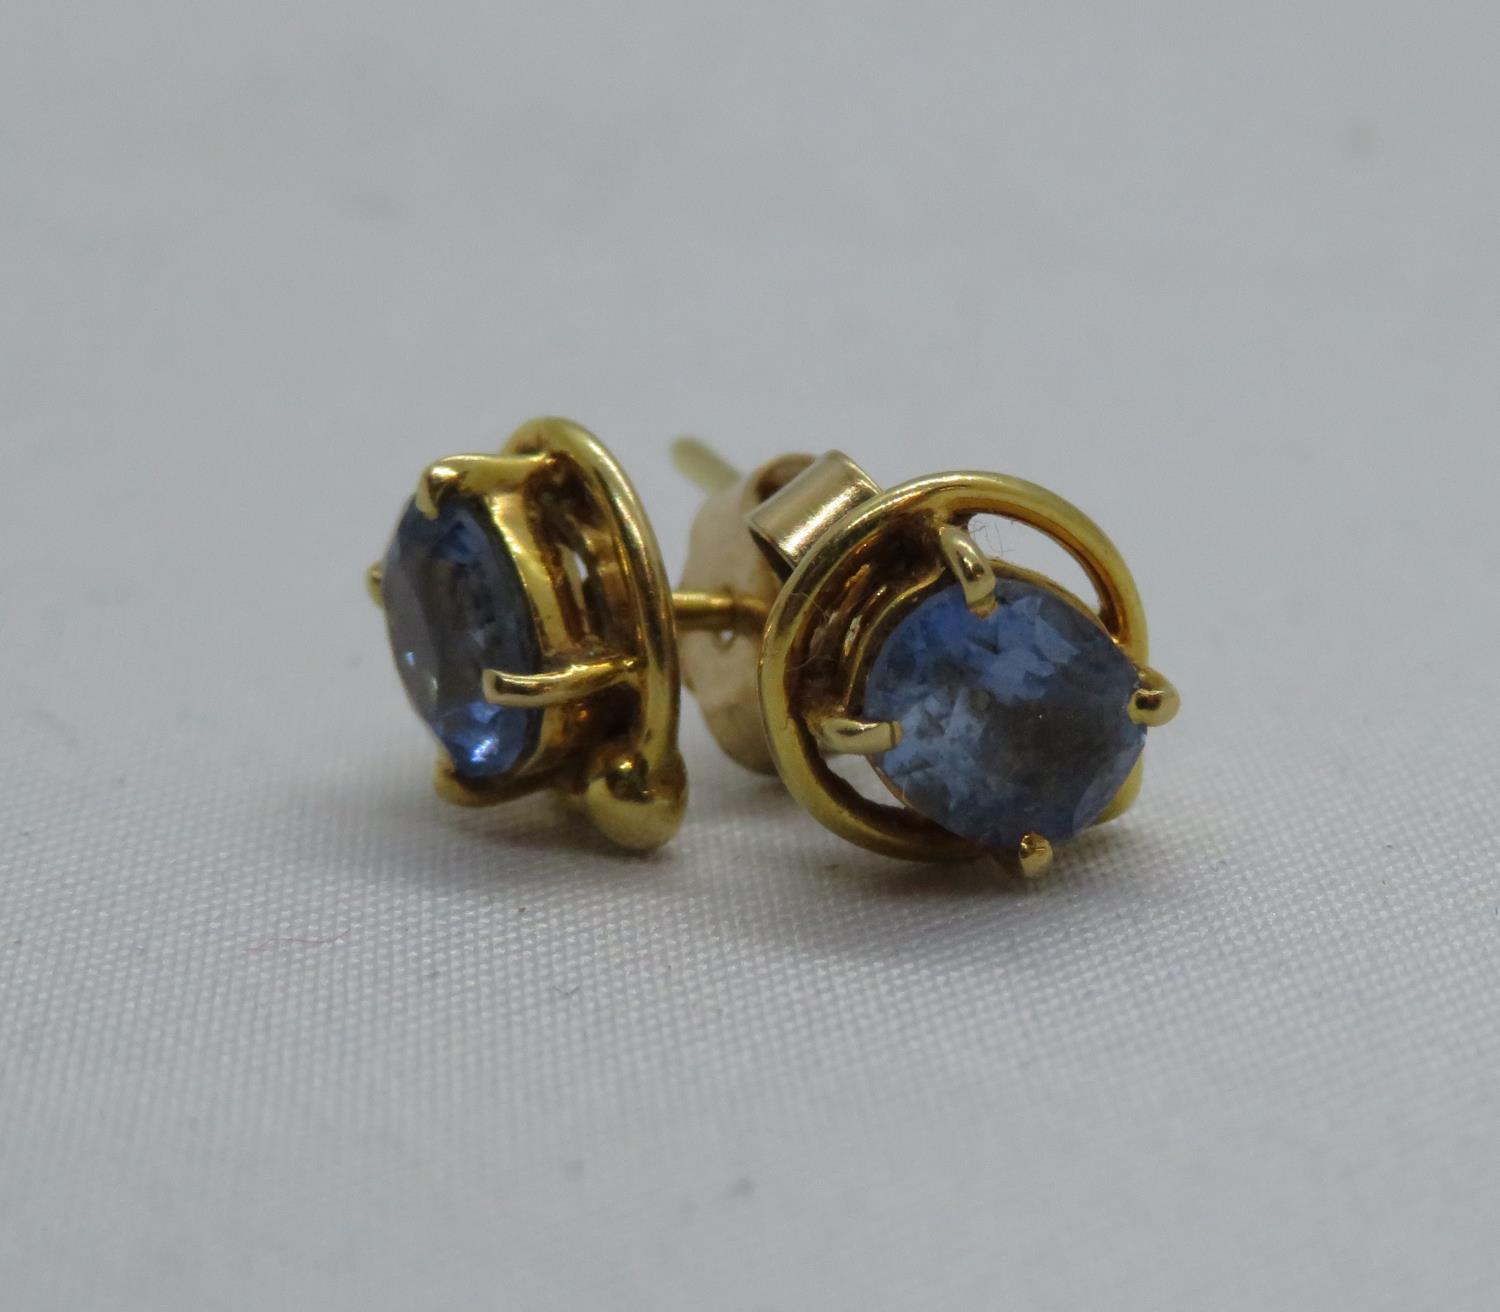 2x high grade yellow gold earrings with brilliant cut .5carat (per ear) sapphires - Image 2 of 2